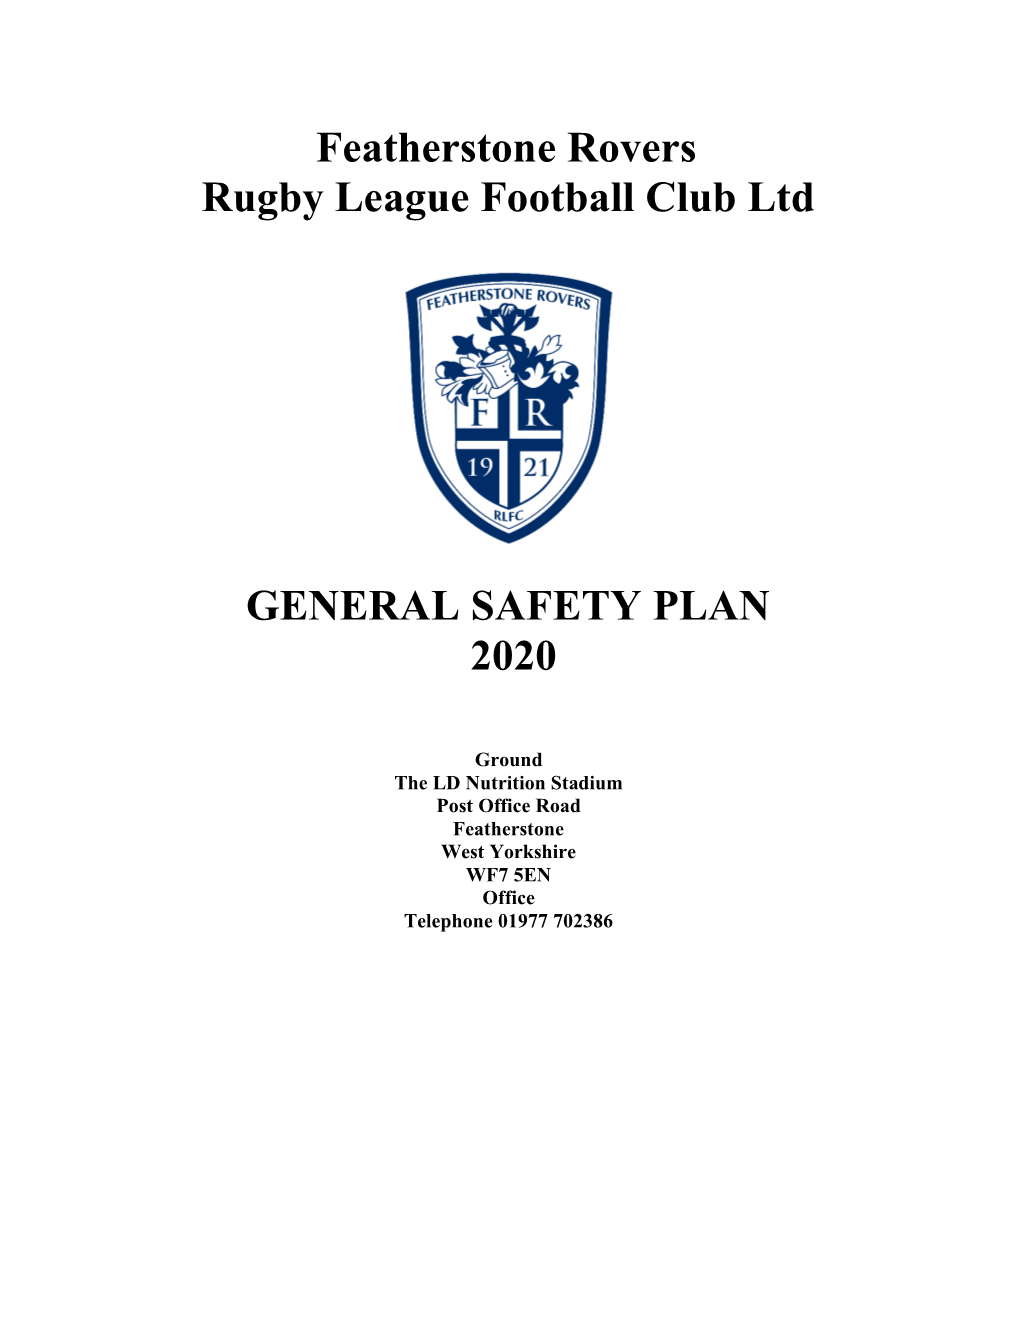 Featherstone Rovers Rugby League Football Club Ltd GENERAL SAFETY PLAN 2020